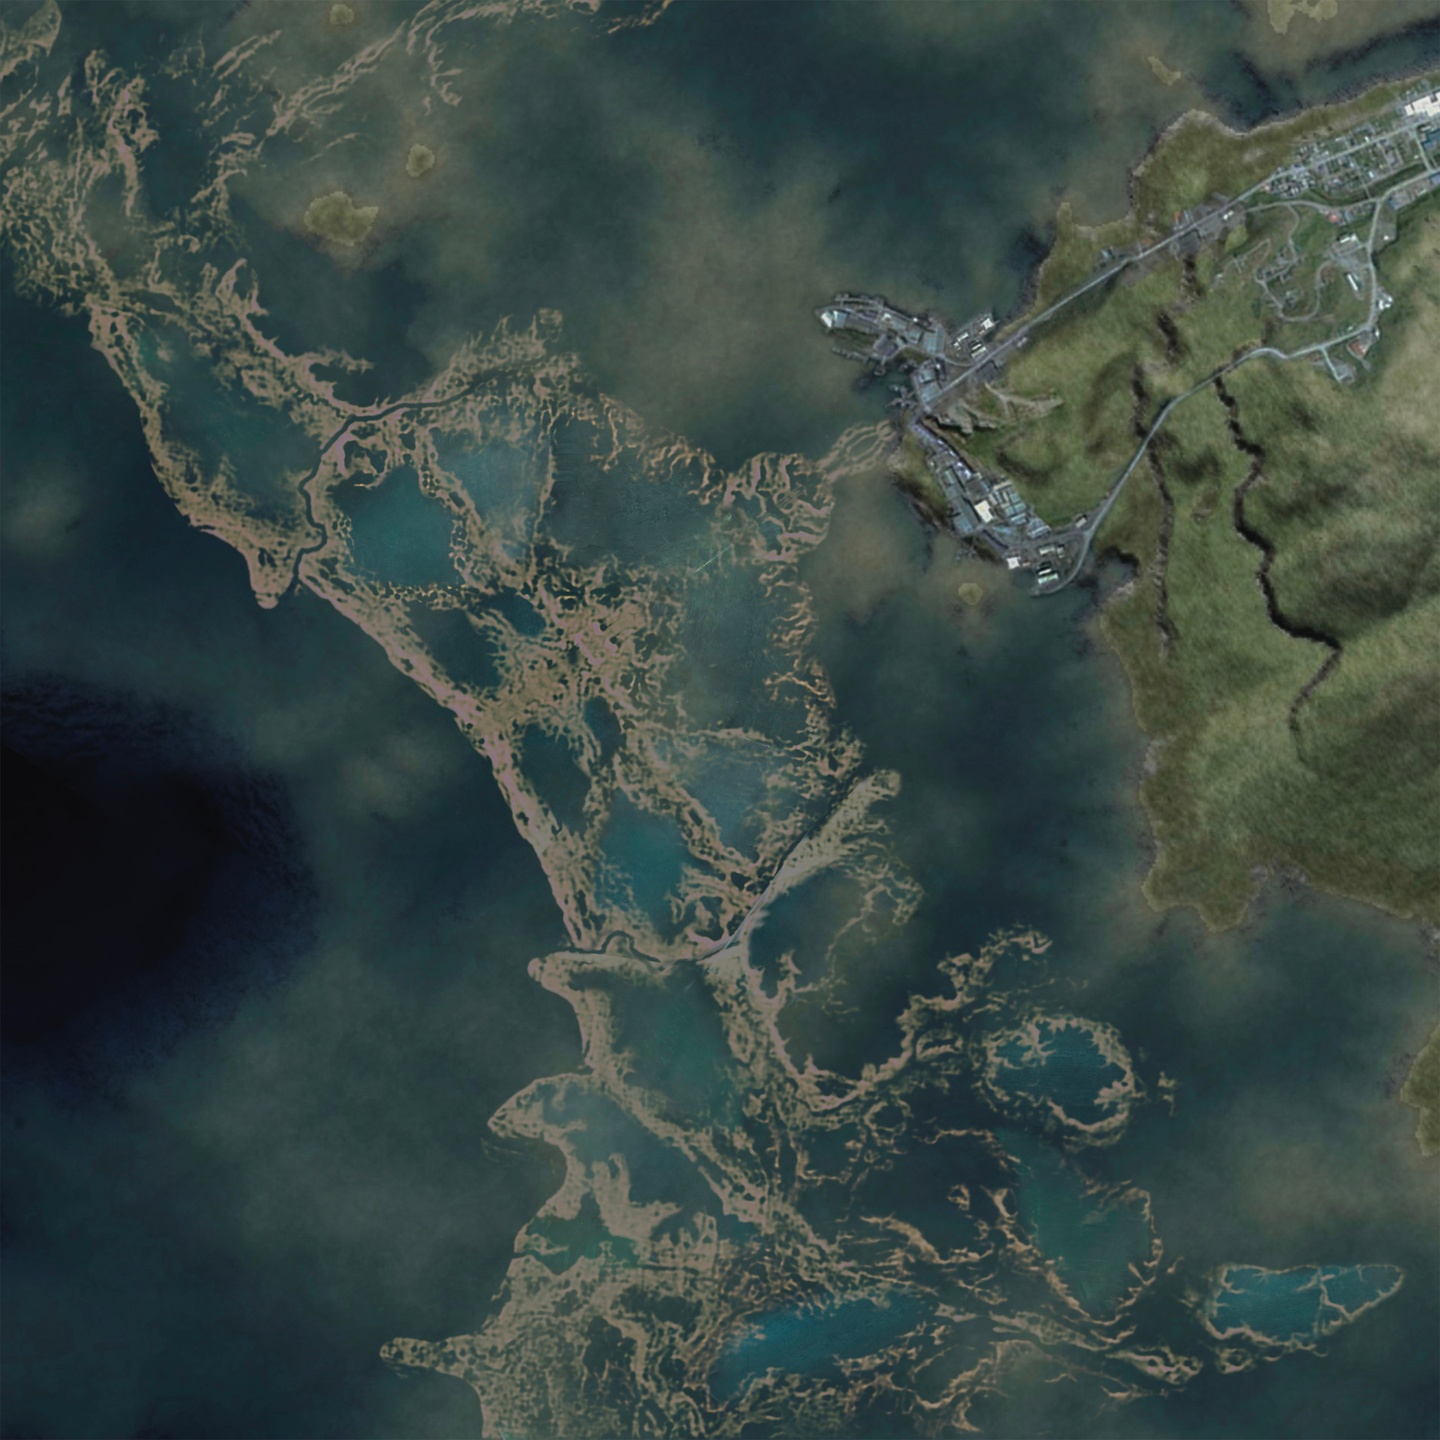 Aerial view of a coastline in dark blues and teals.